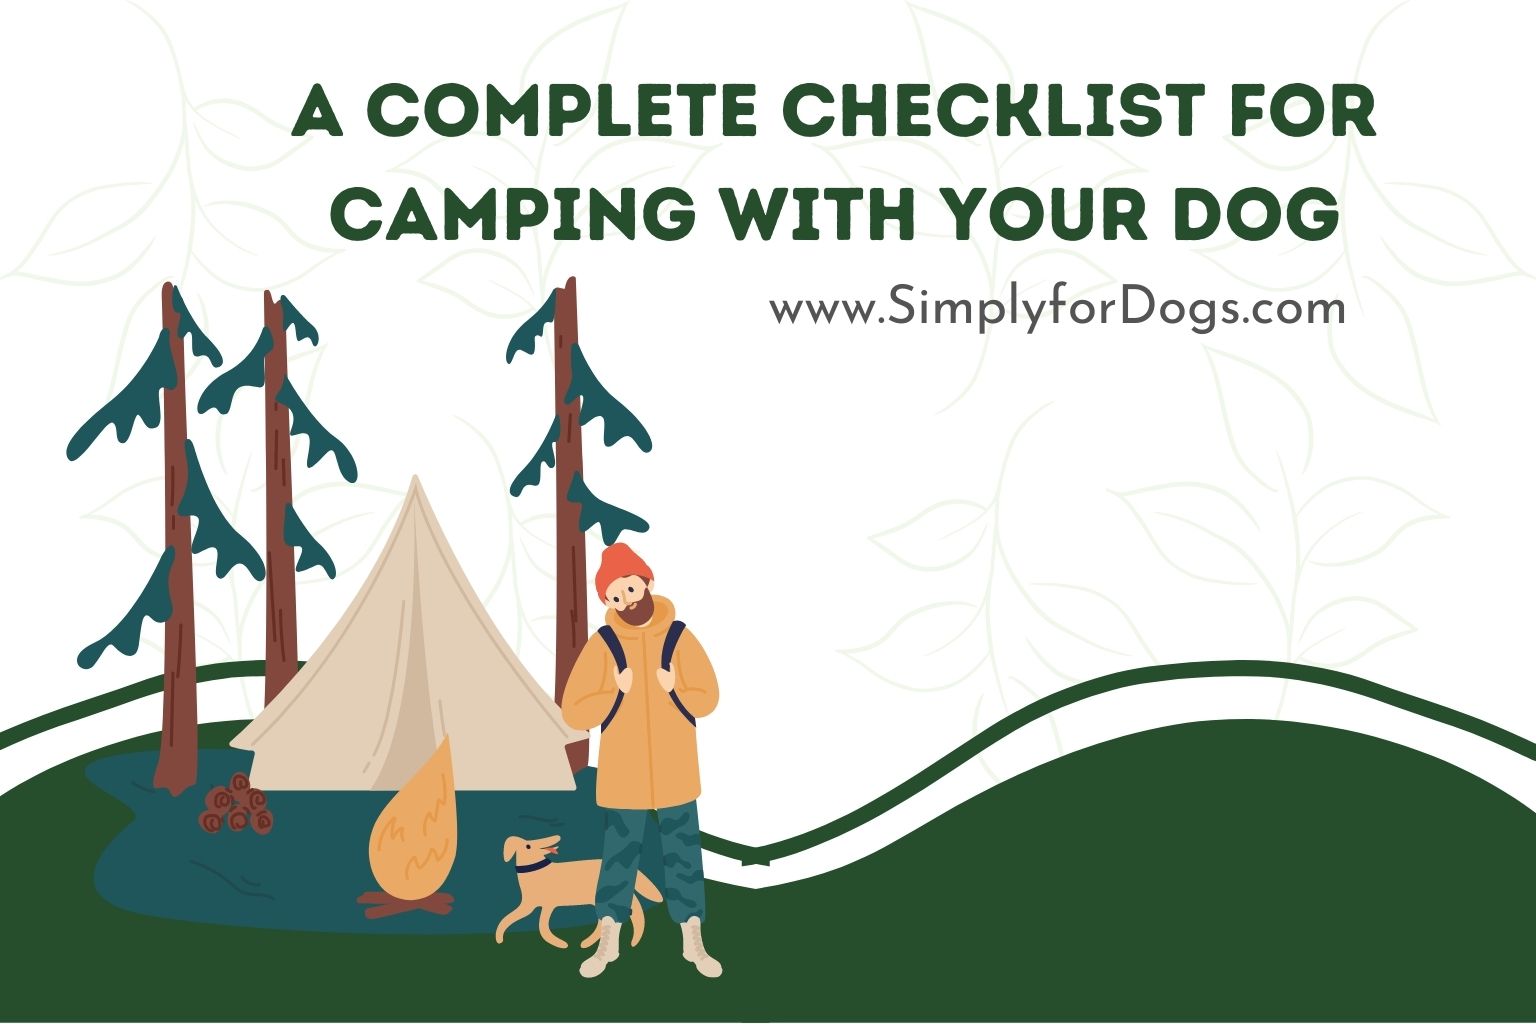 A Complete Checklist for Camping with Your Dog